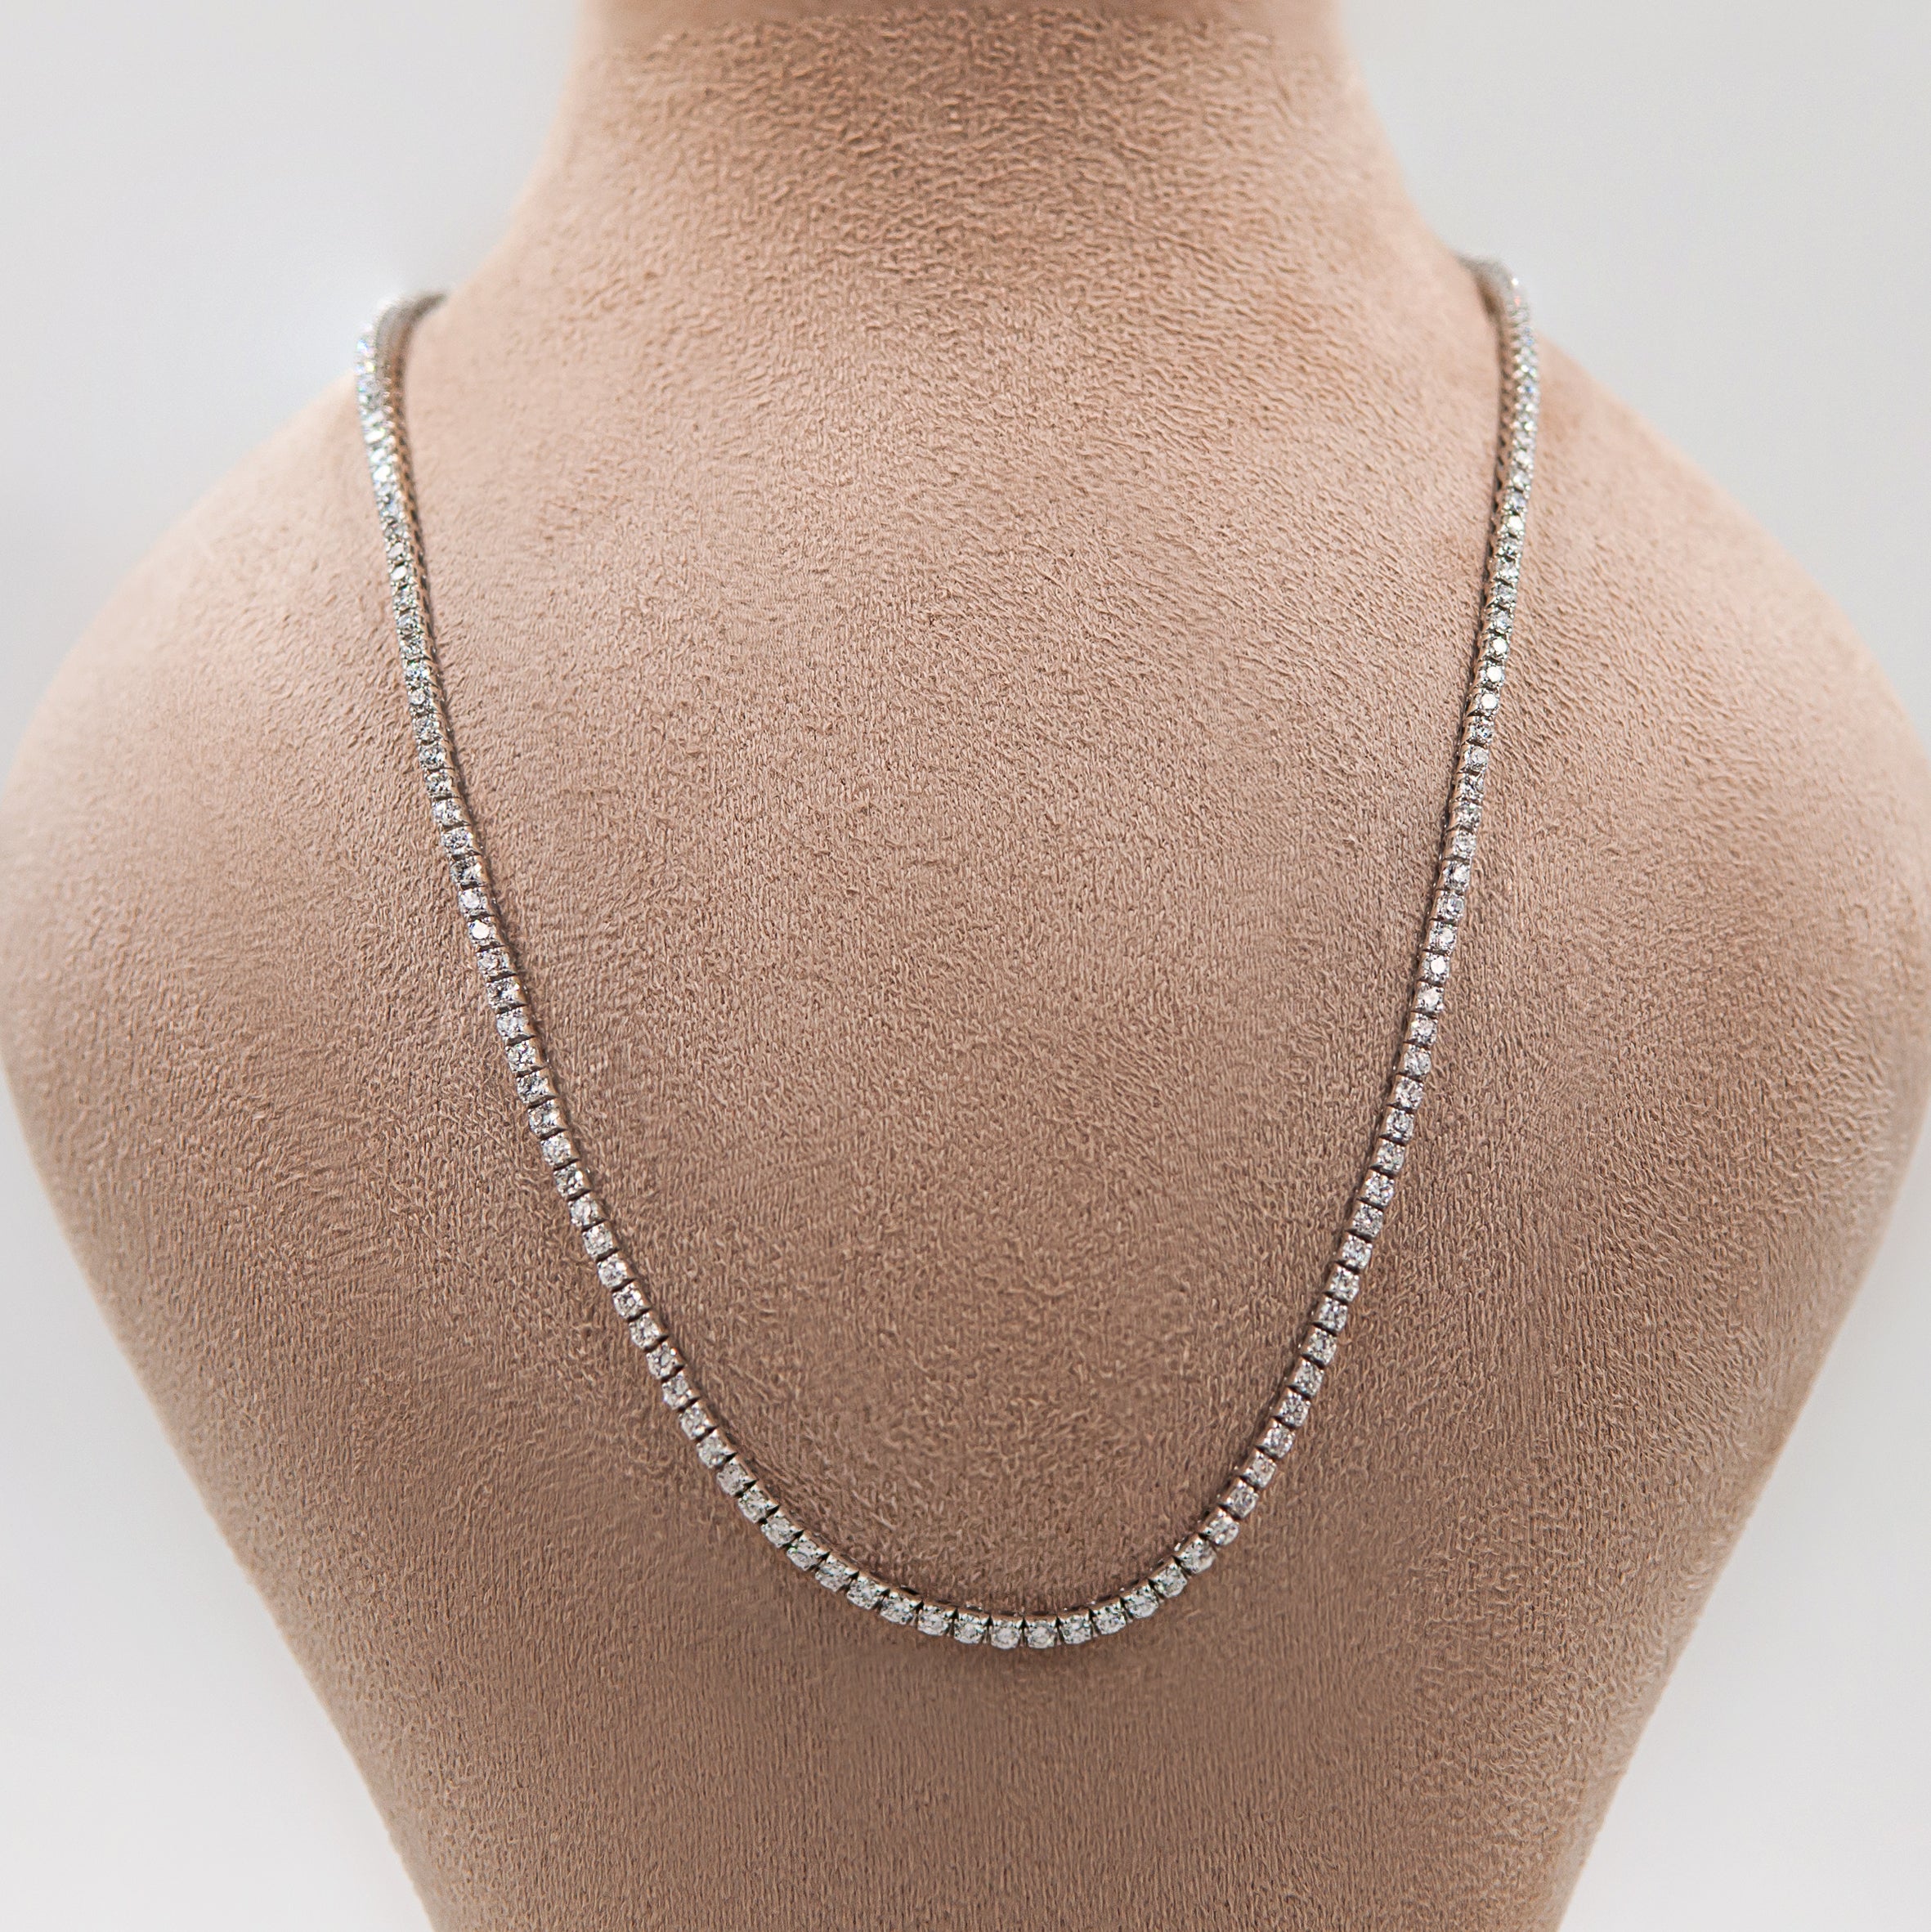 Tennis Necklace with Diamonds 6ct 